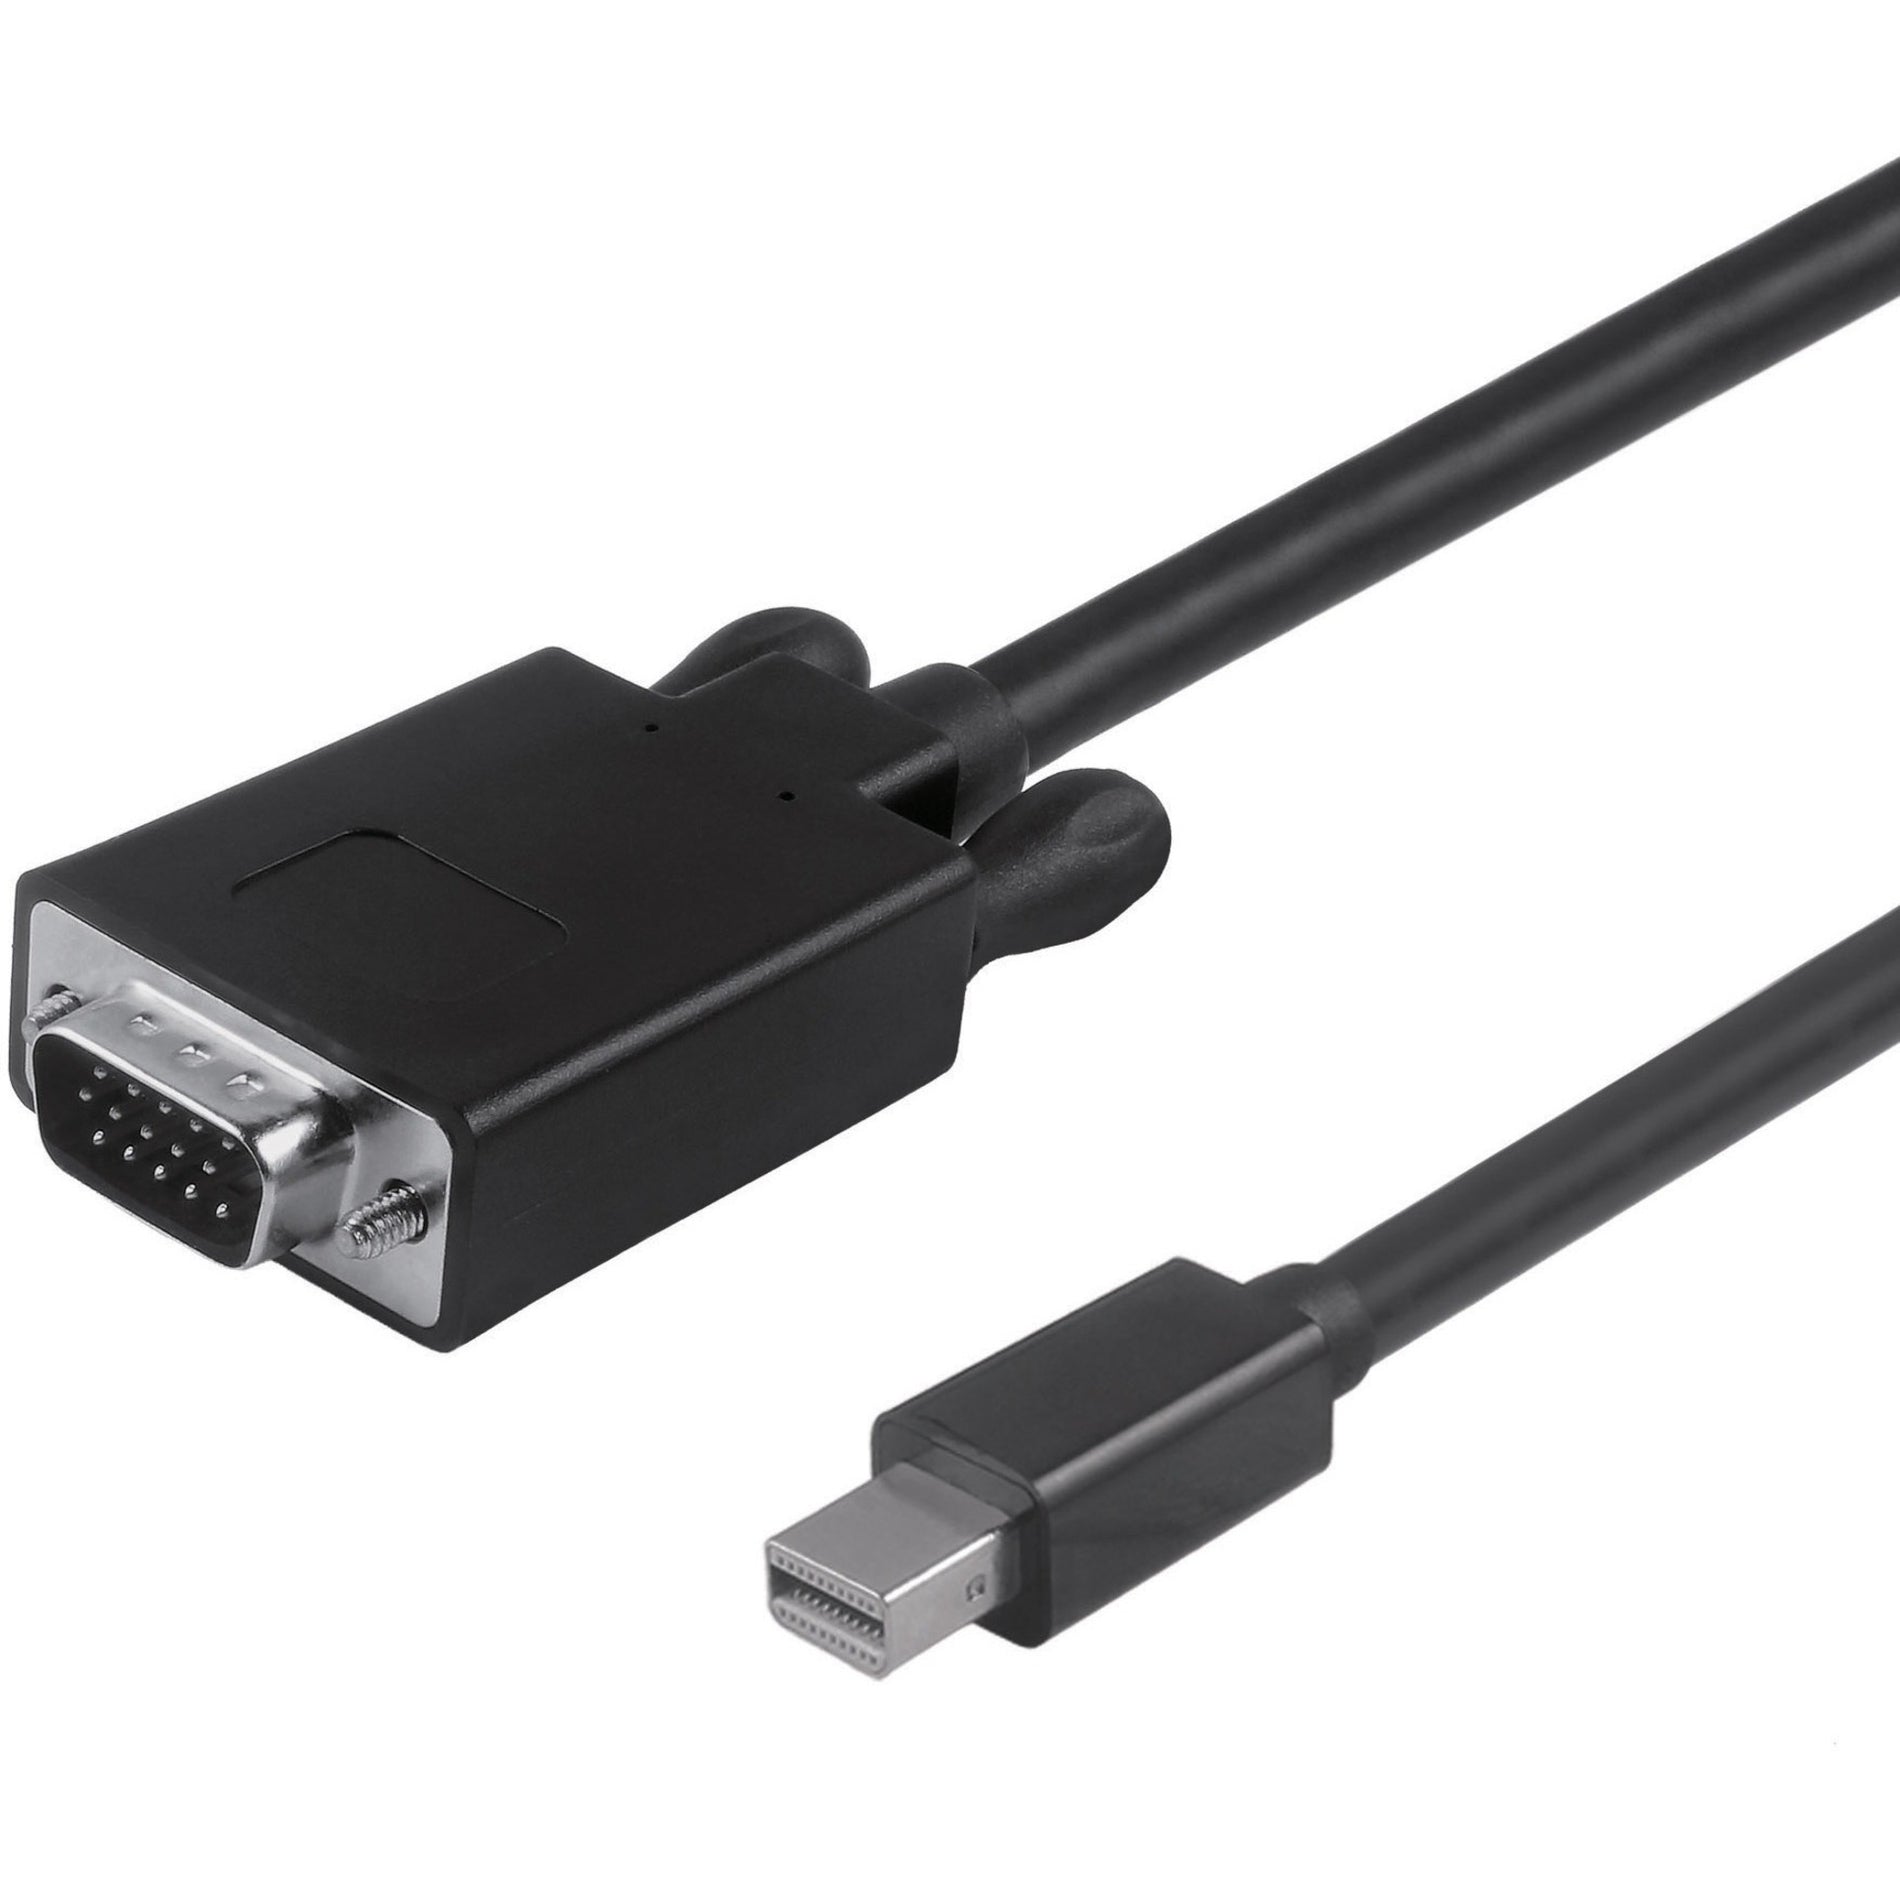 VisionTek 901217 Mini DisplayPort to VGA 2 Meter Active Cable (M/M), Plug & Play, 1920 x 1080 Supported Resolution